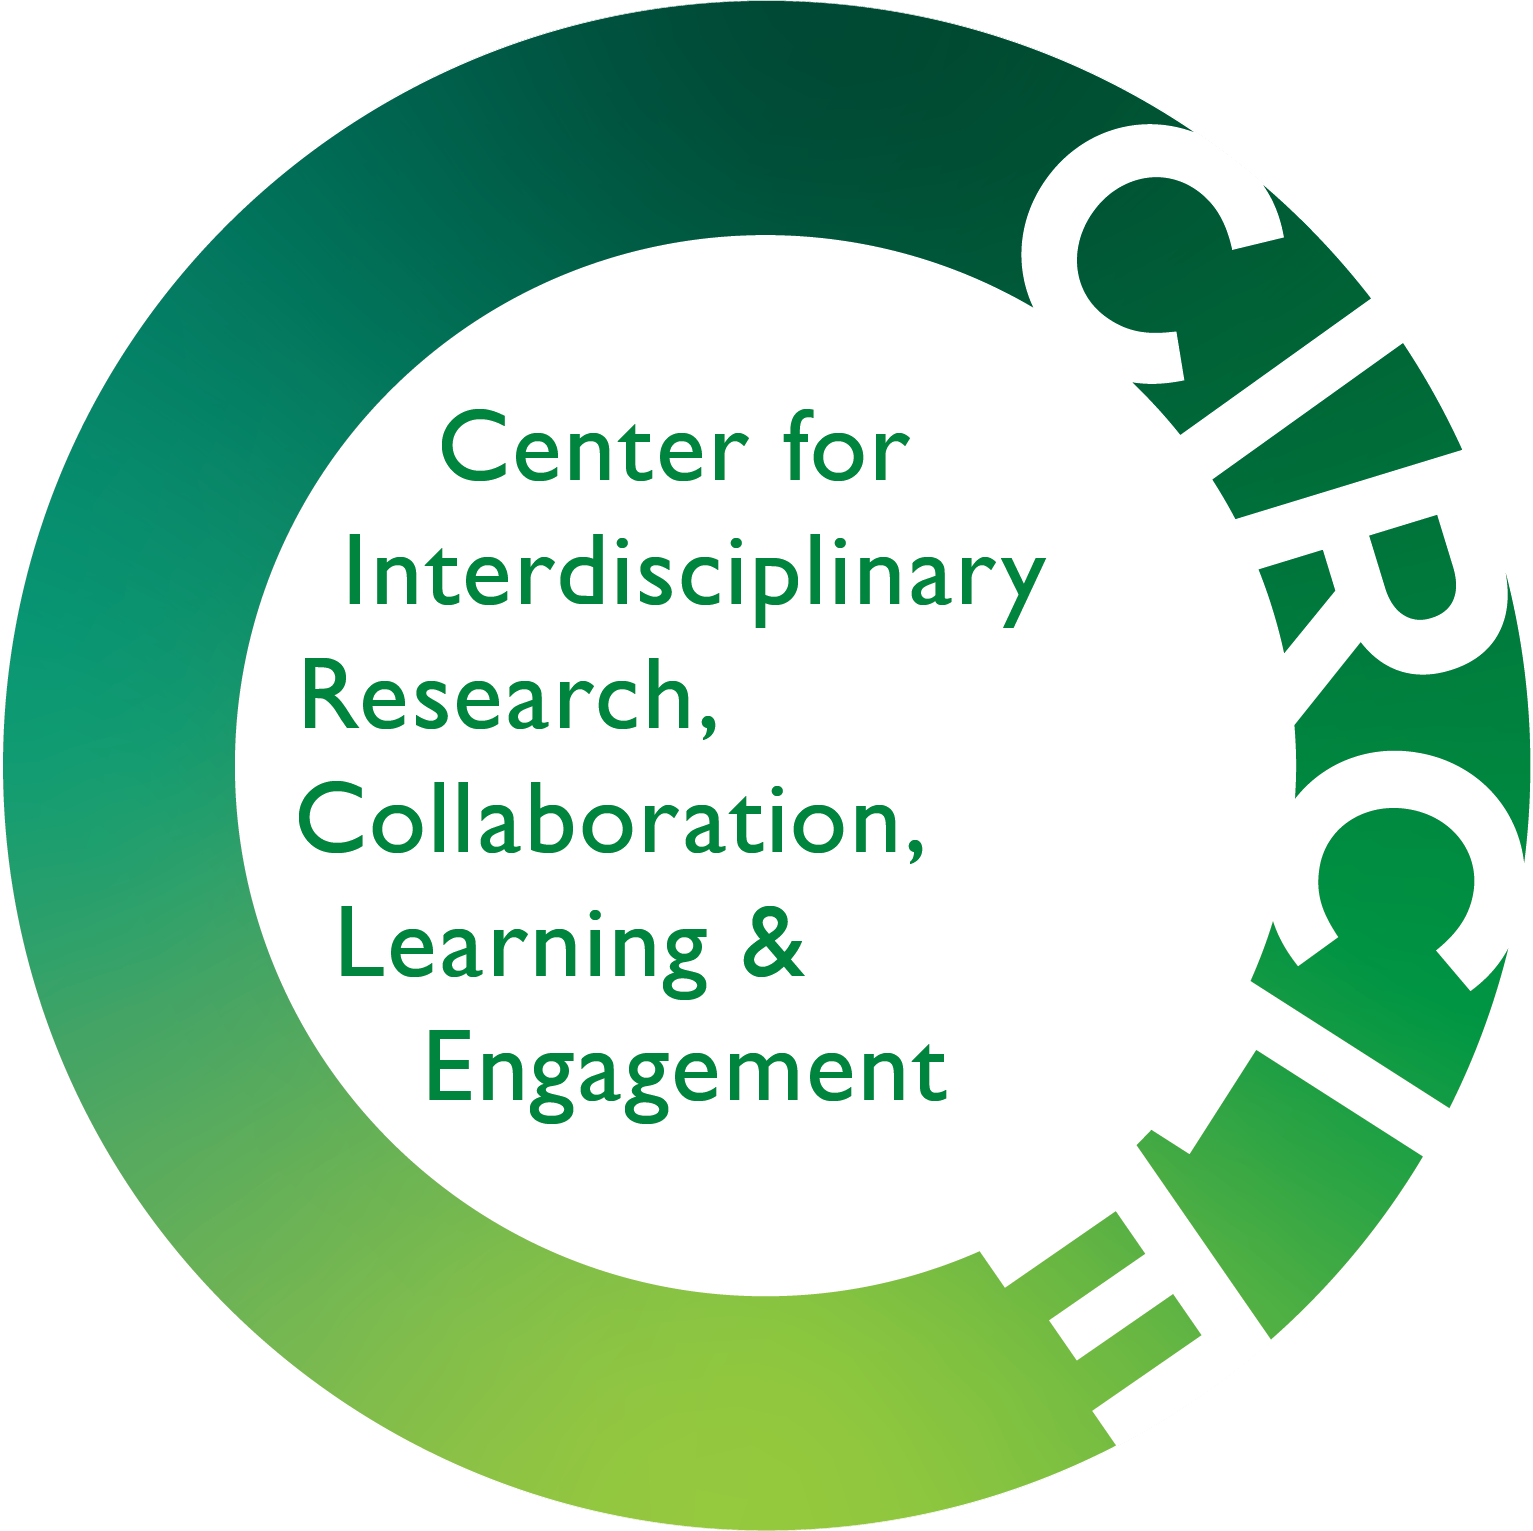 Center for Interdisciplinary Research, Collaboration, Learning & Engagement (CIRCLE)